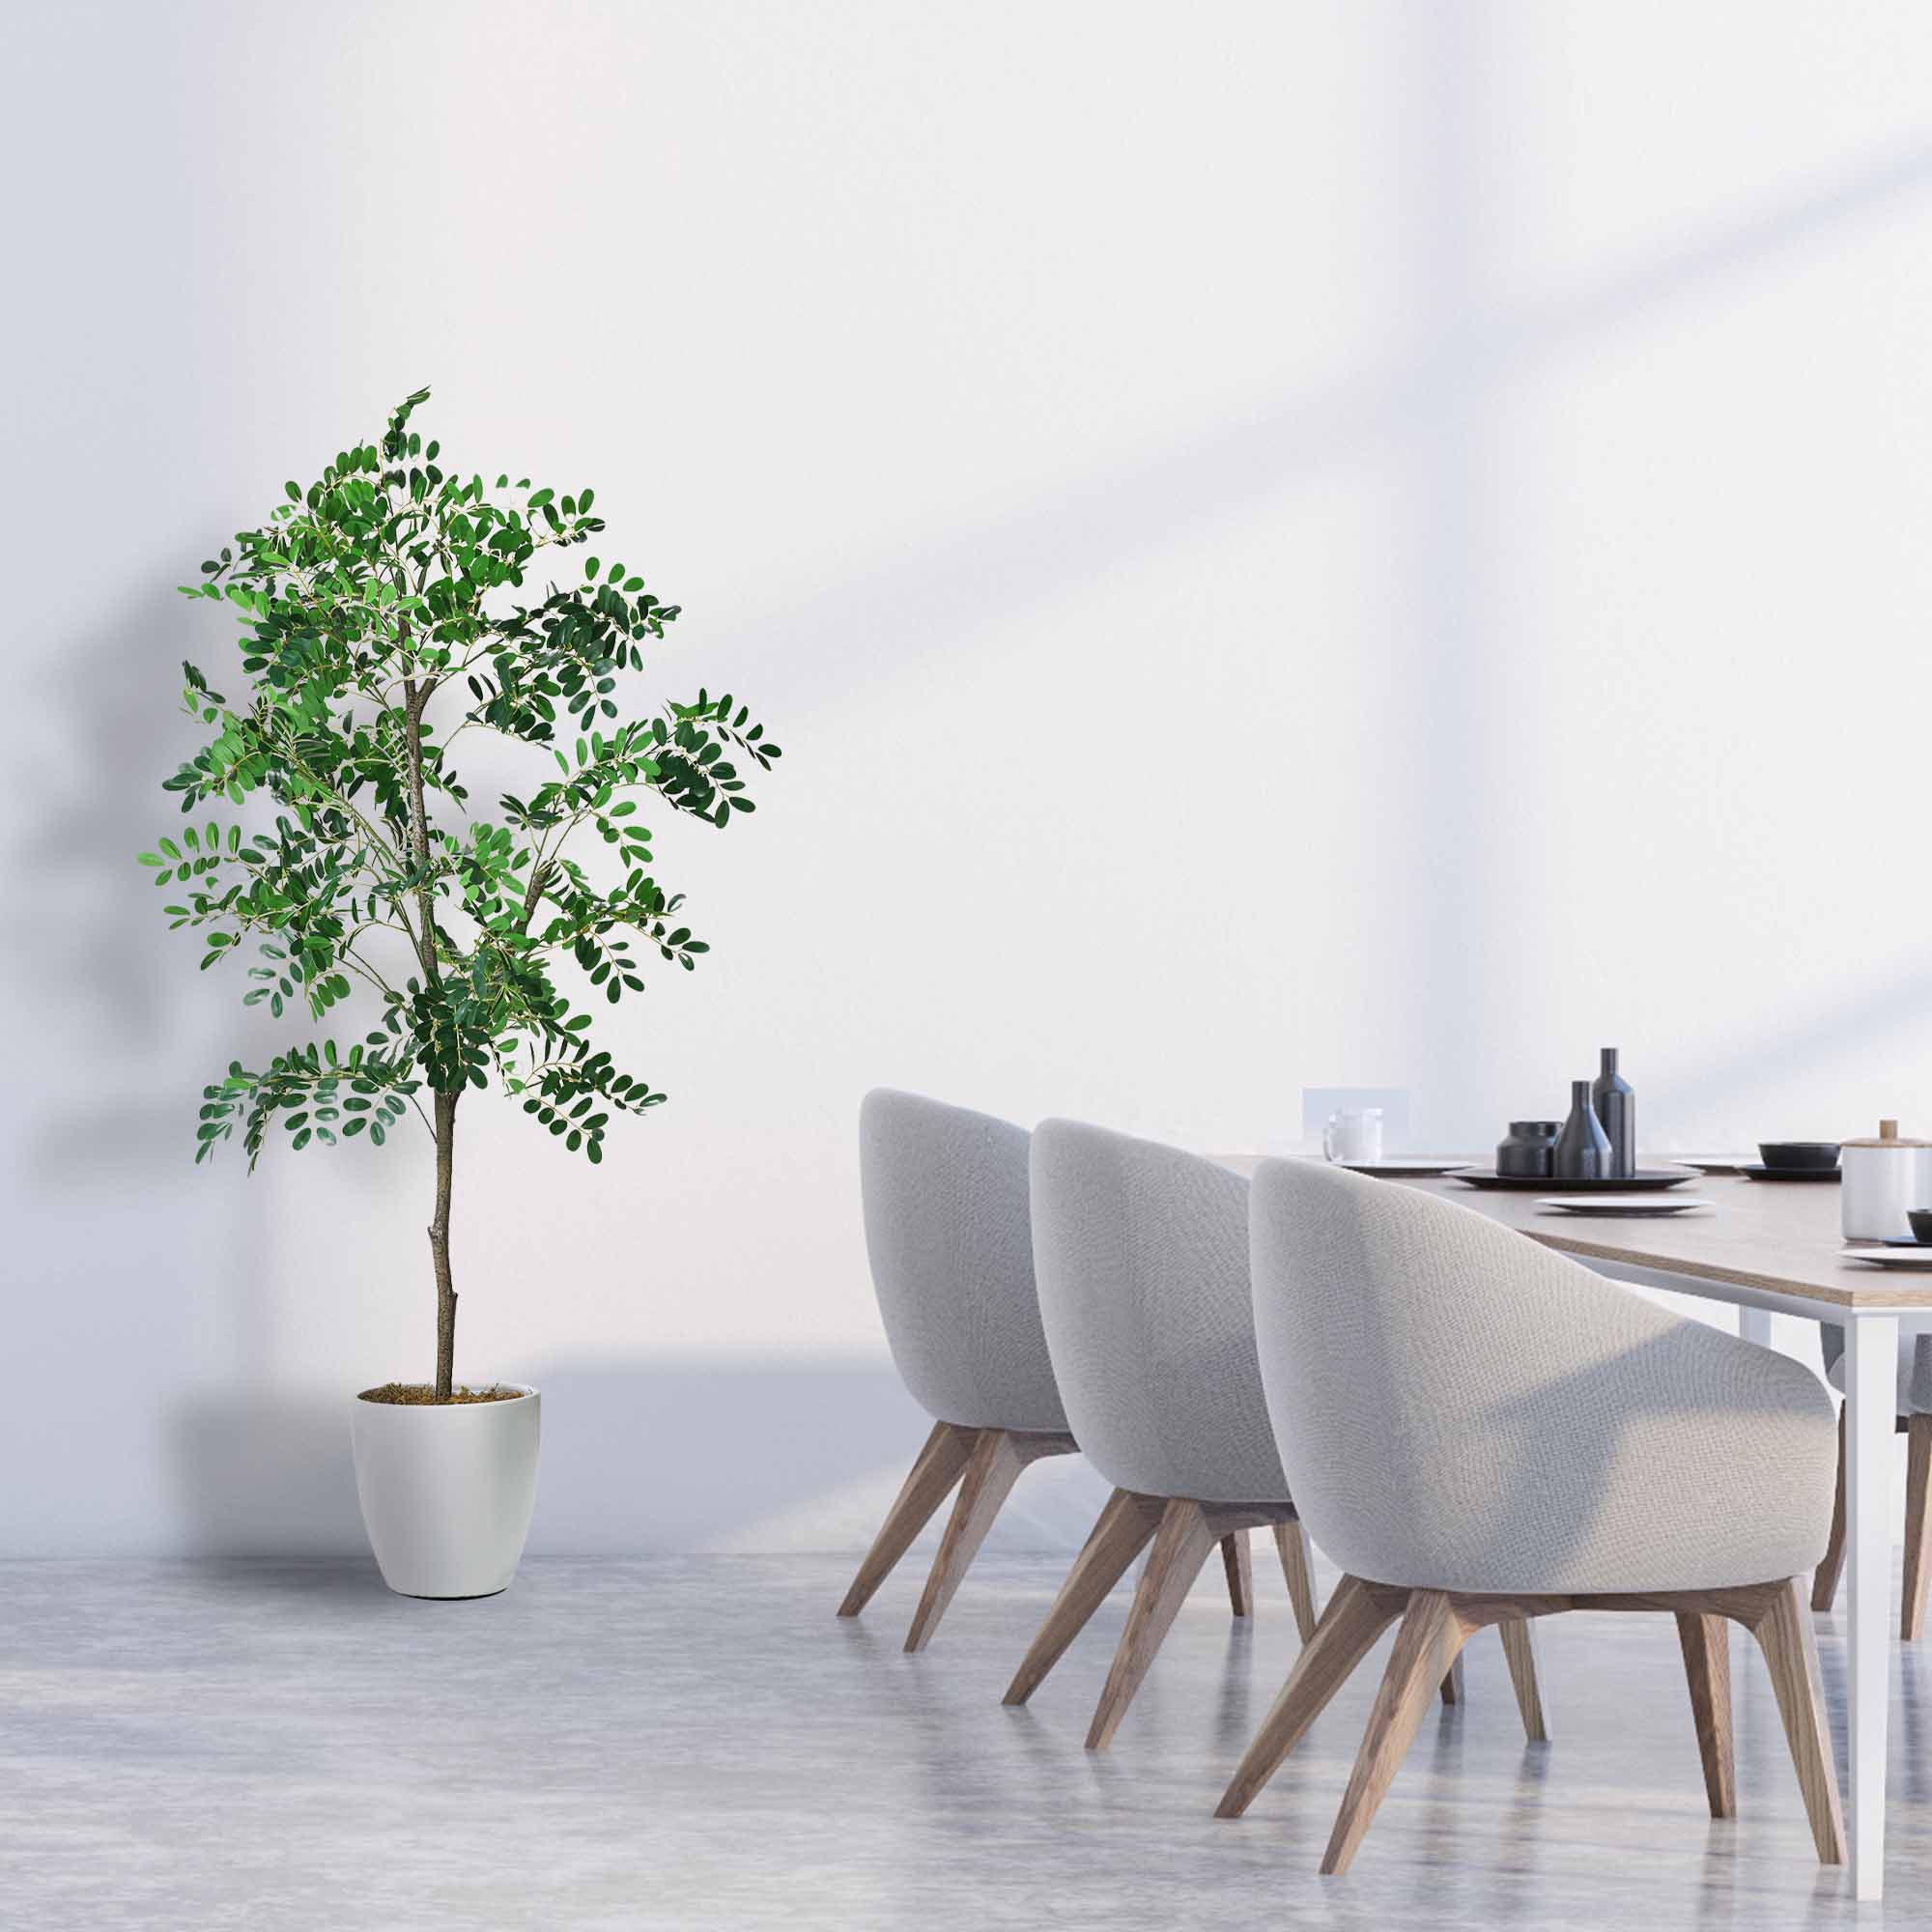 Artificial Sorbus Tree in White Tapered Pot - 60